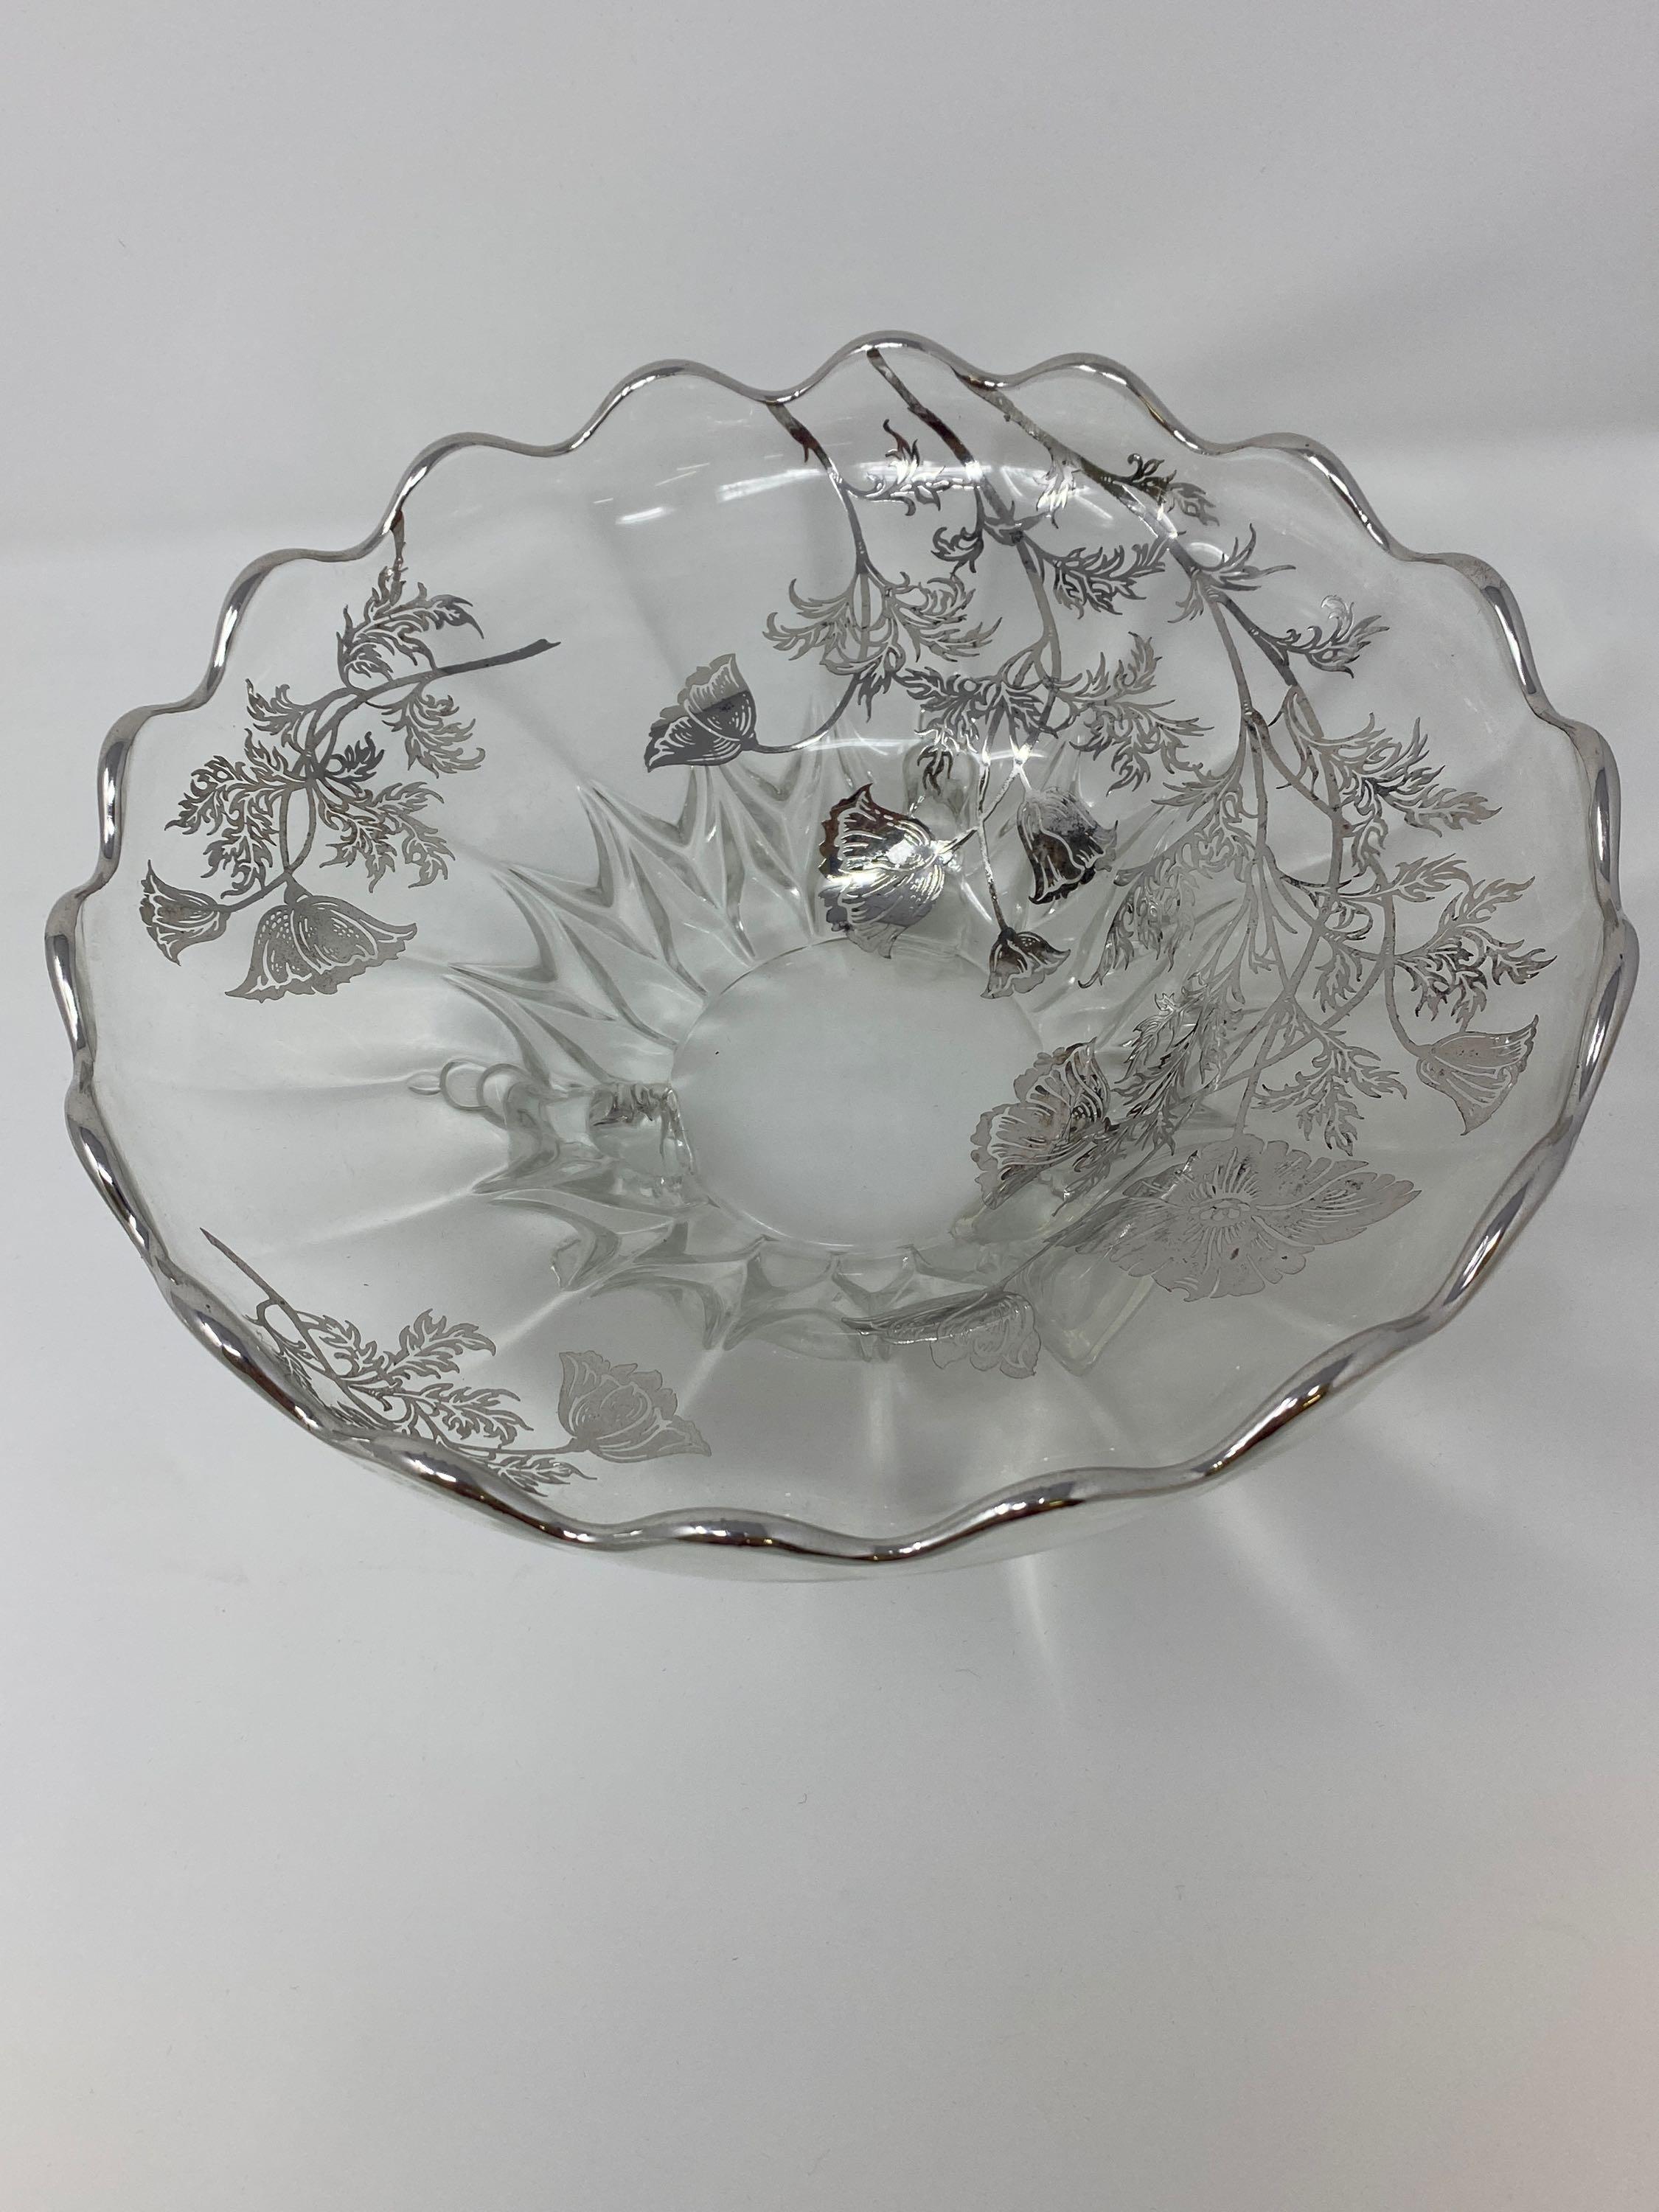 2 Glass Footed Bowls- One with Silver Overlay, Other with Etched Design